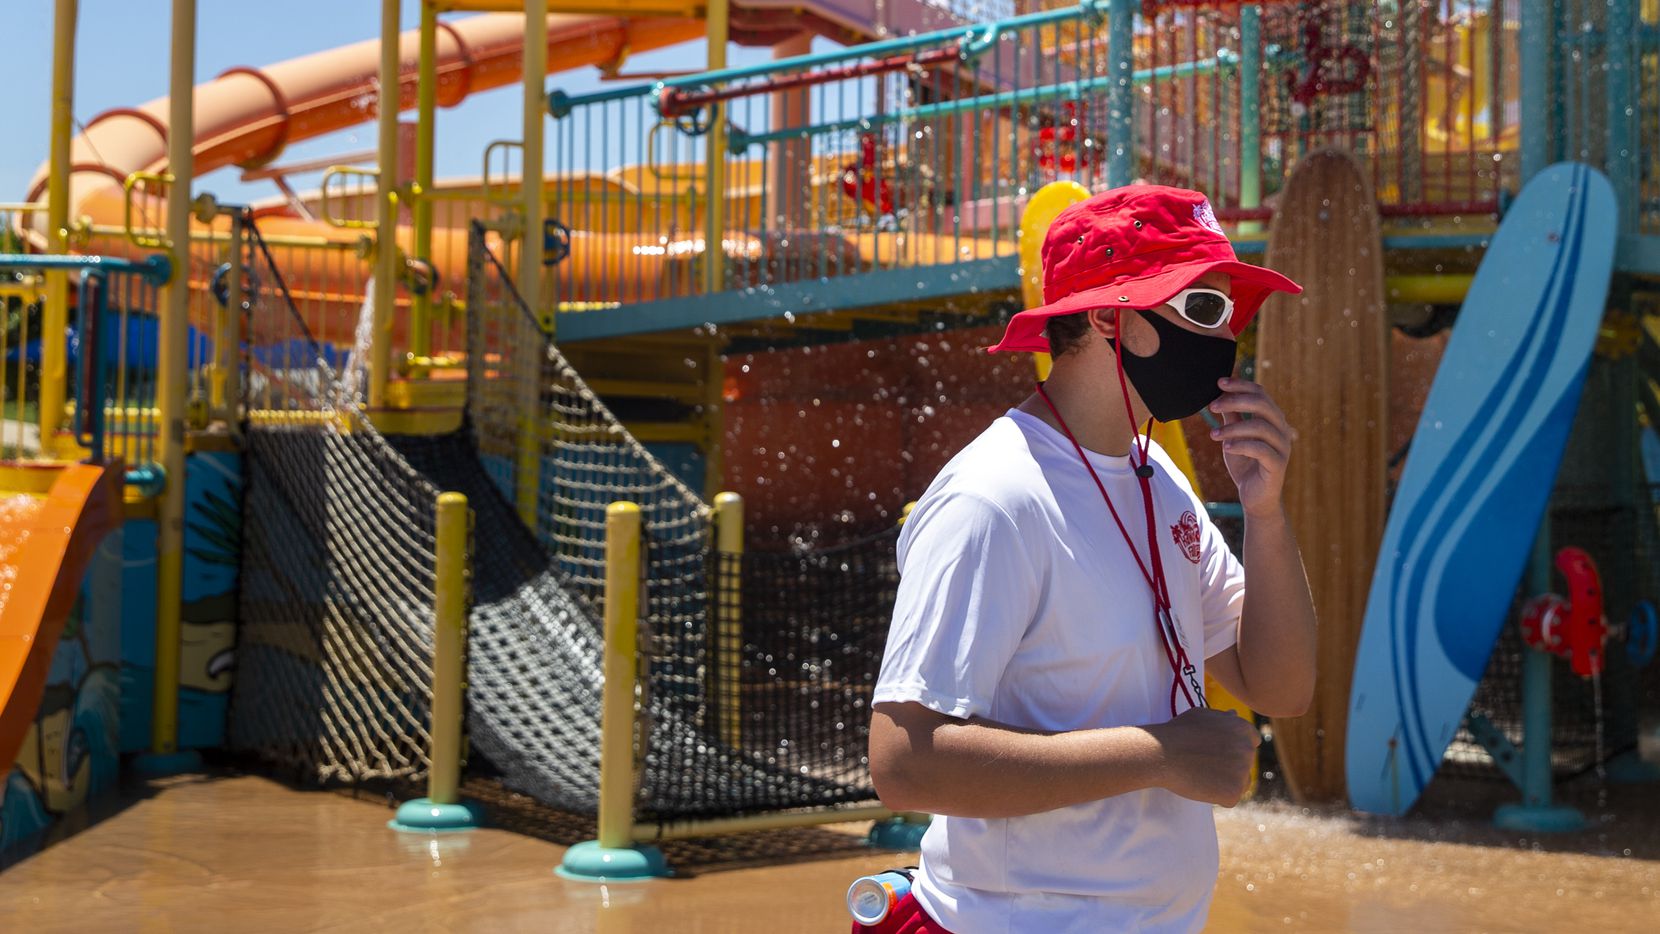 Lifeguard Michael Schmidt adjusts his face mask while monitoring water attractions at the Hawaiian Falls waterpark in Roanoke. Hawaiian Falls was one of the few water parks in North Texas to reopen Friday.